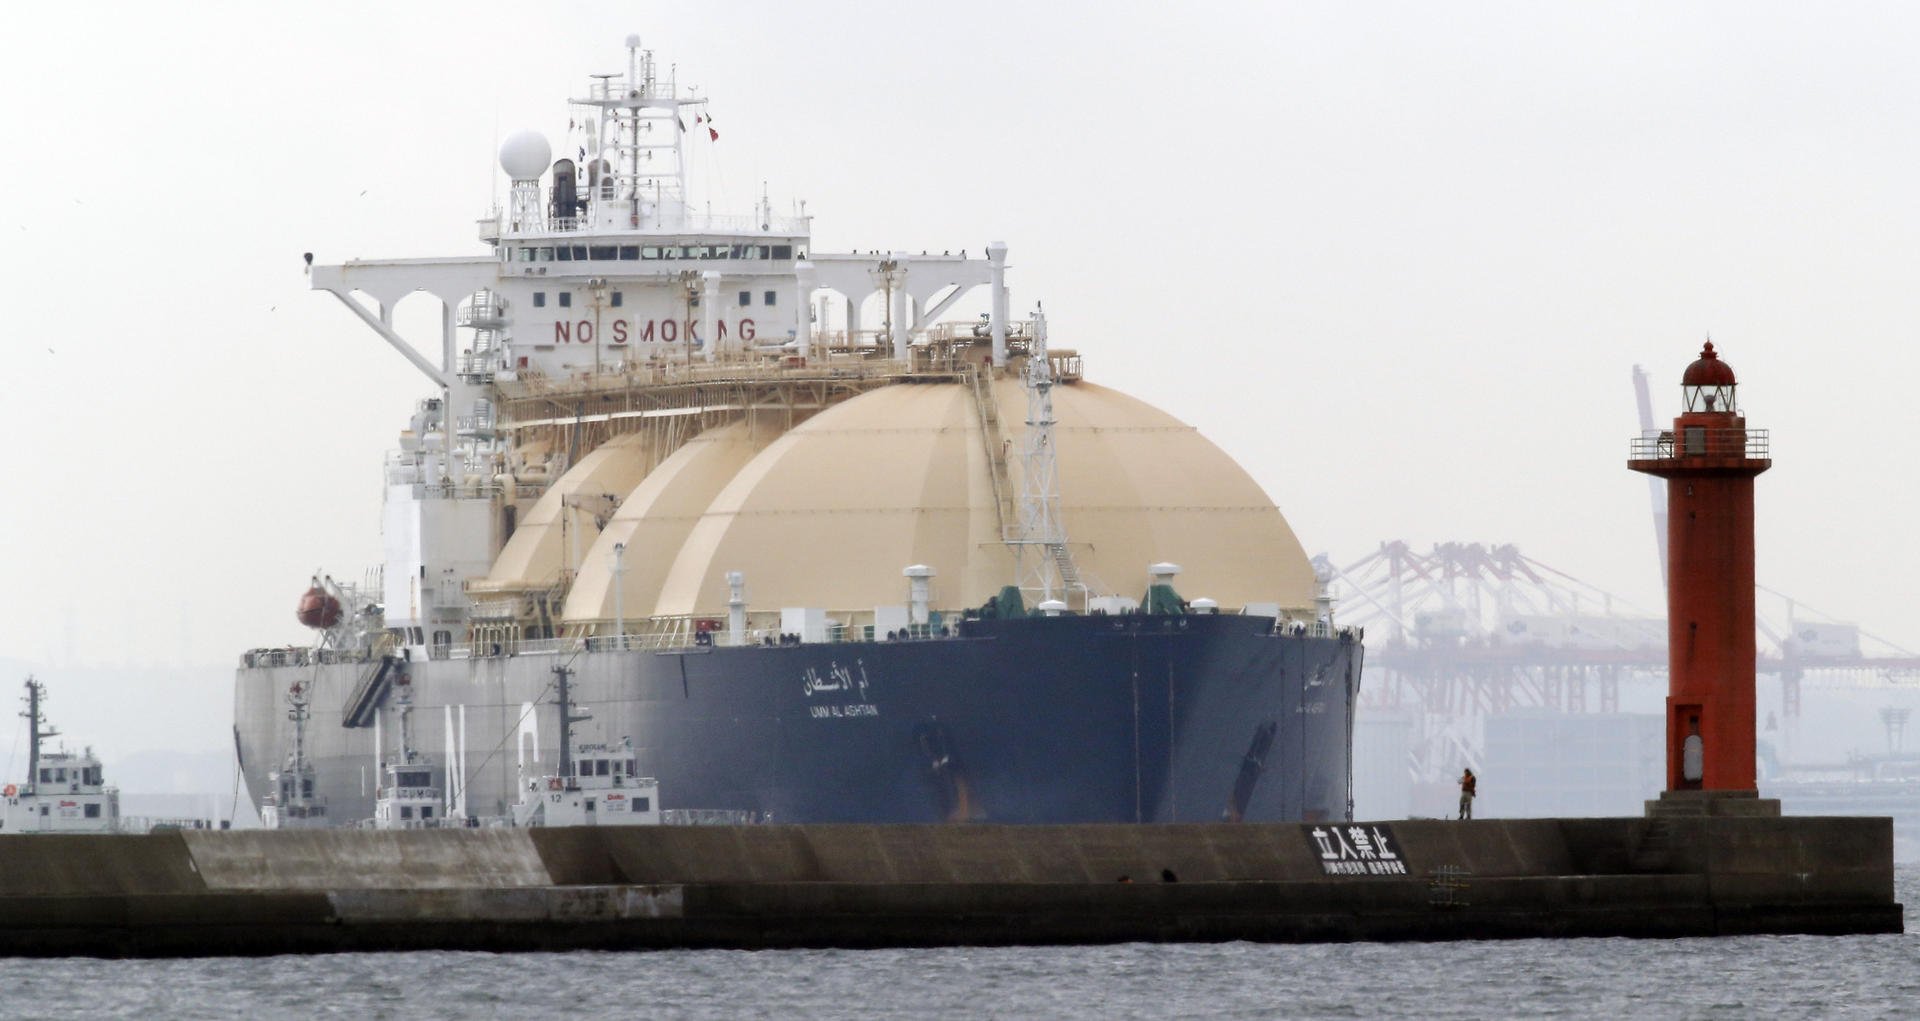 It has been estimated that demand for LNG in Asia will surge from 140 million tonnes this year to 500 million tonnes in 2030. Photo: AP